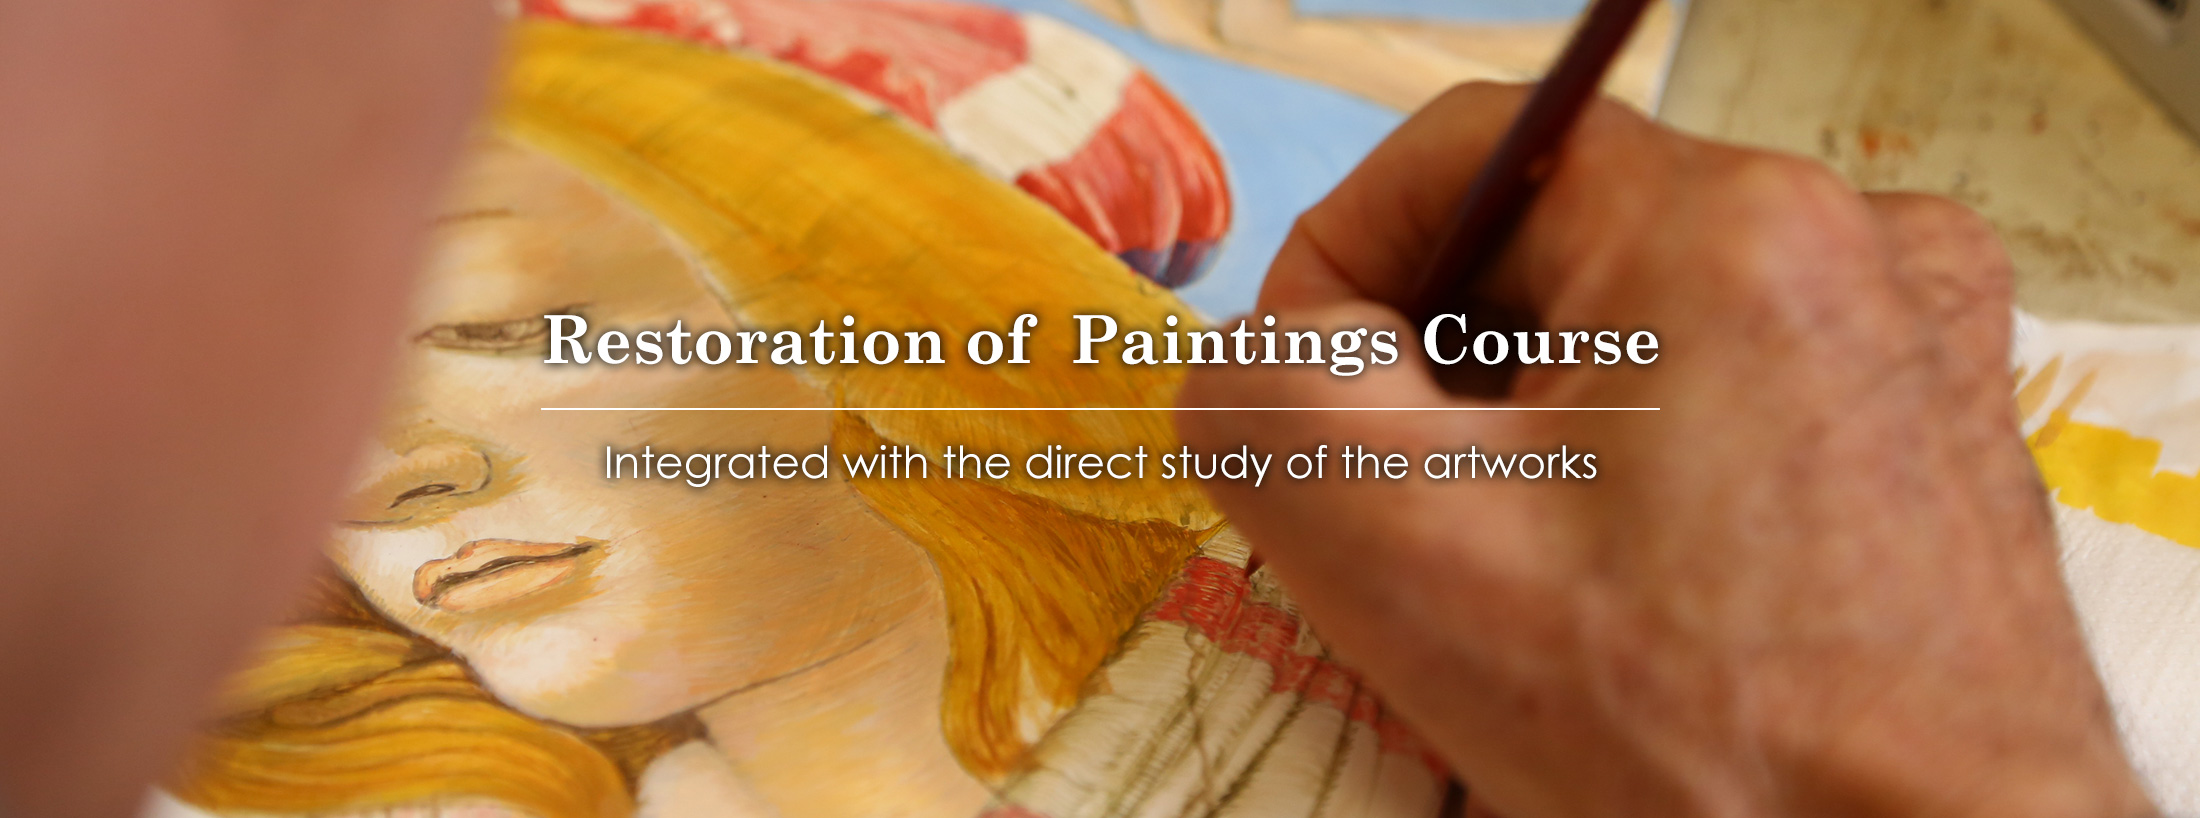 Restoration of Paintings Course